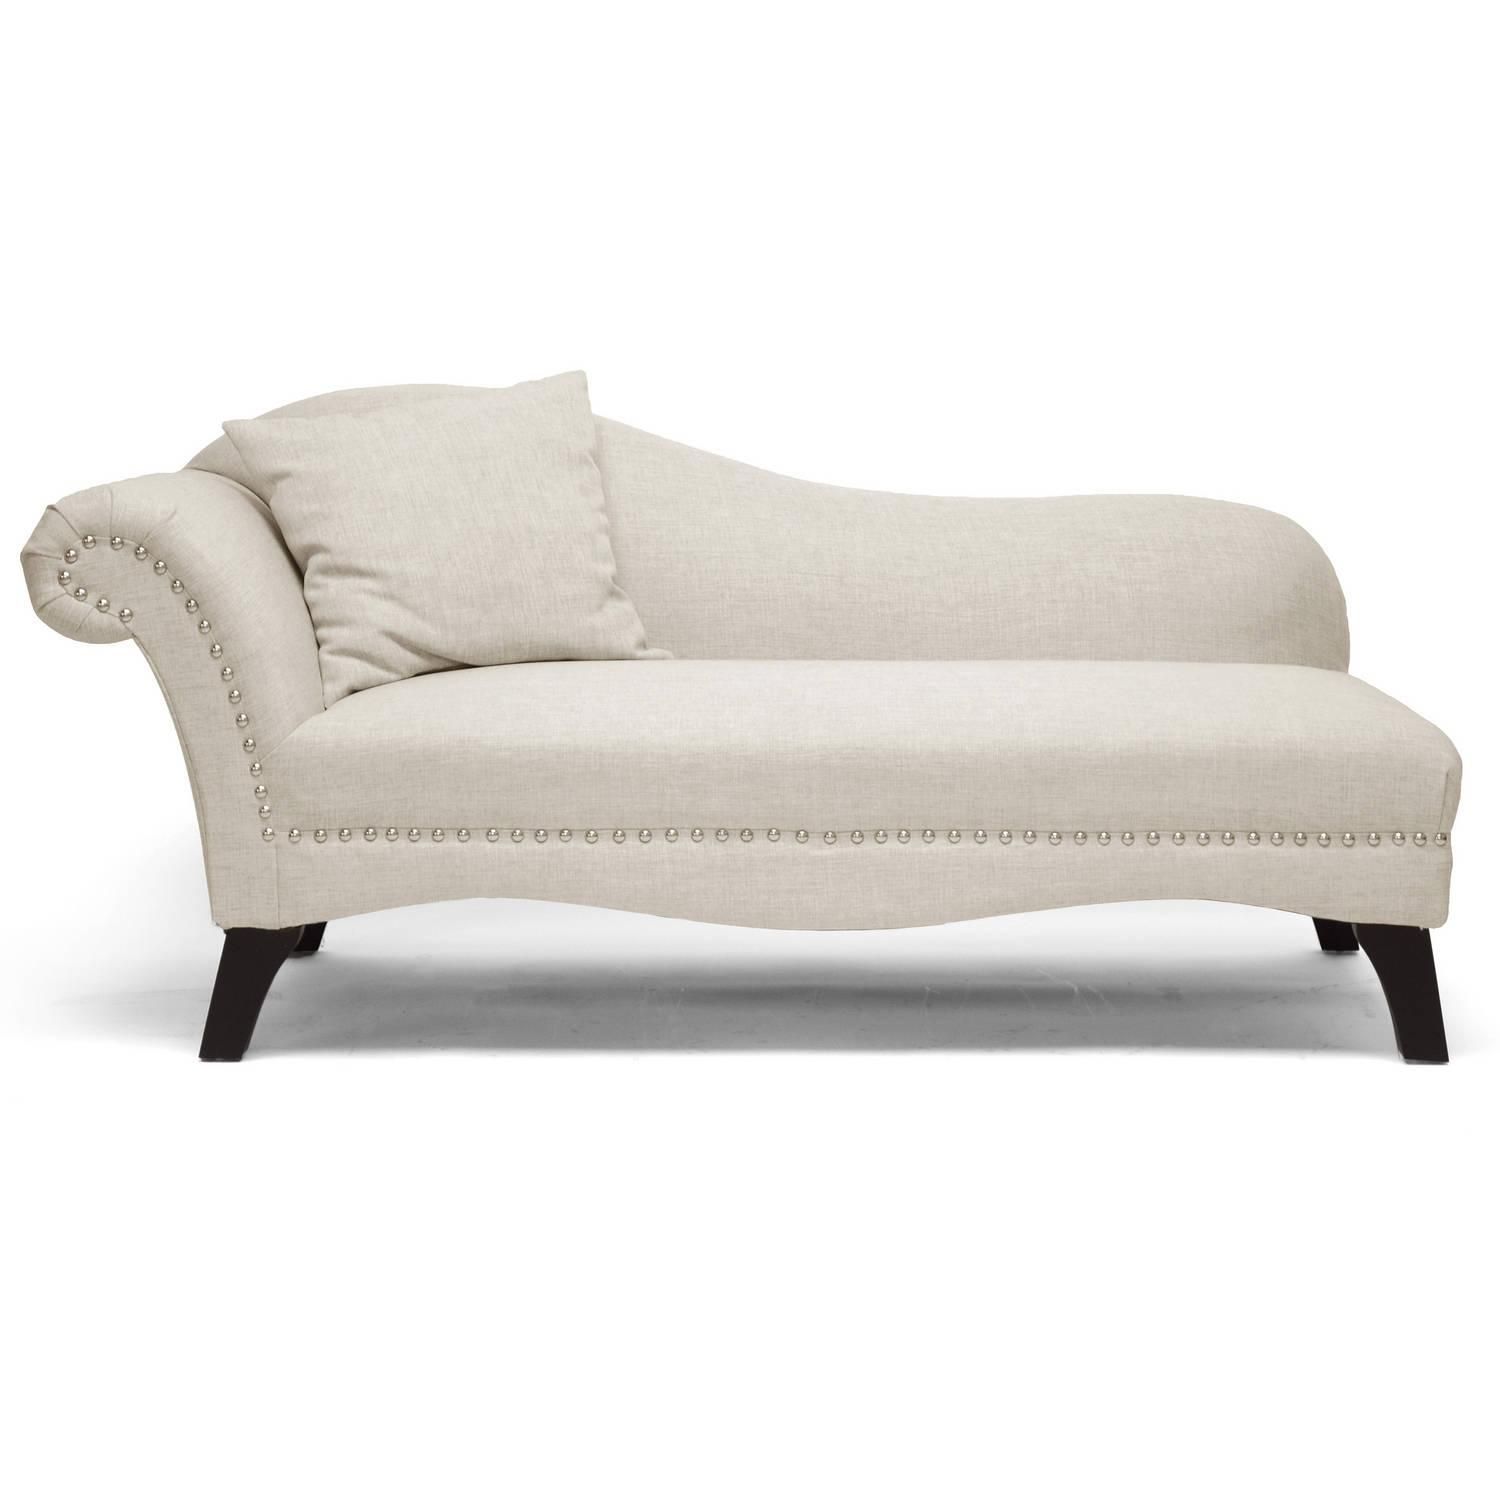 Chaise Lounges – Walmart Inside Sofas And Chaises Lounge Sets (View 15 of 20)